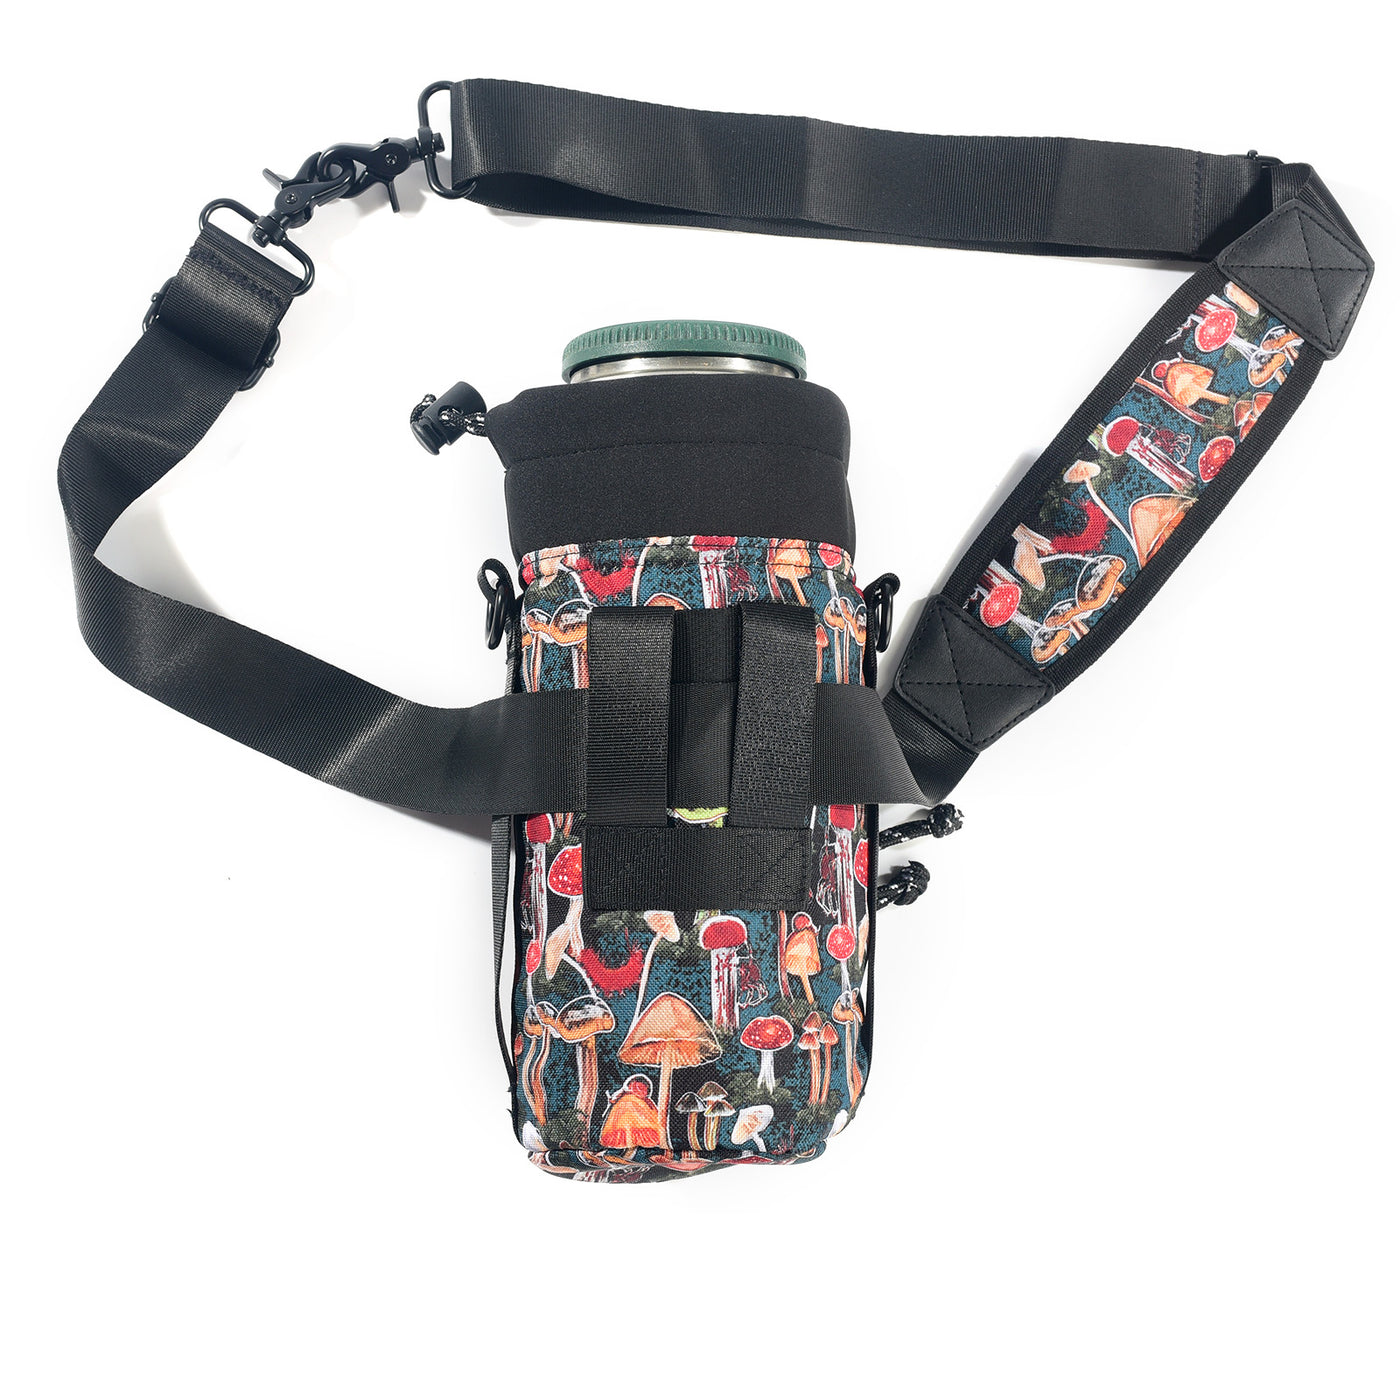 Insulated Water Bottle Carrier Bag With Adjustable Strap For